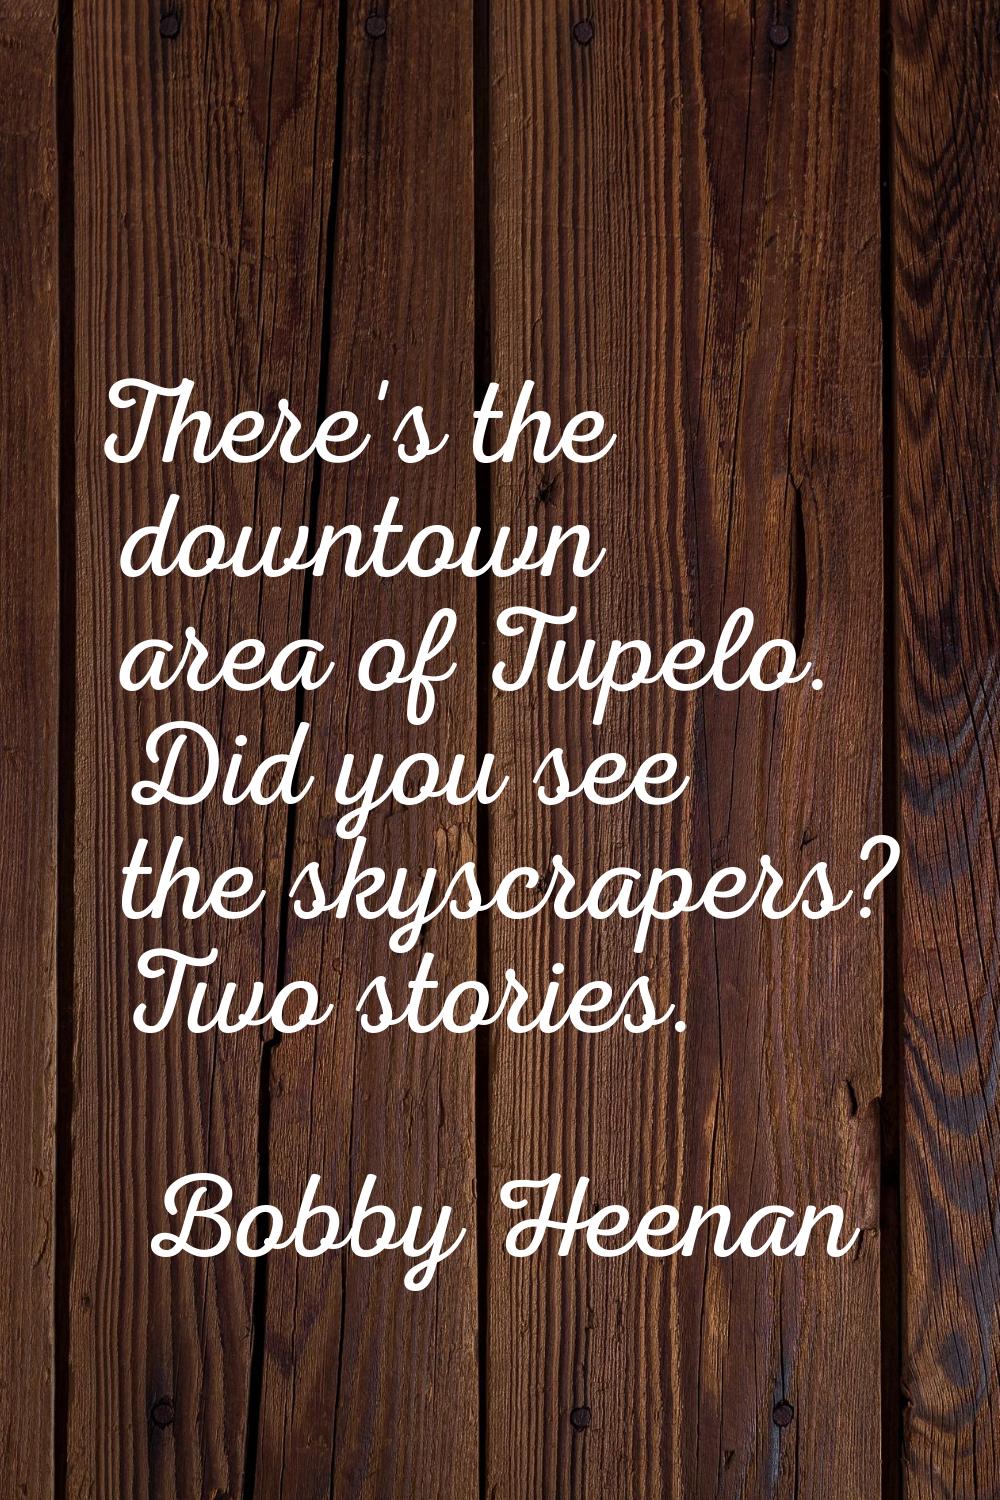 There's the downtown area of Tupelo. Did you see the skyscrapers? Two stories.